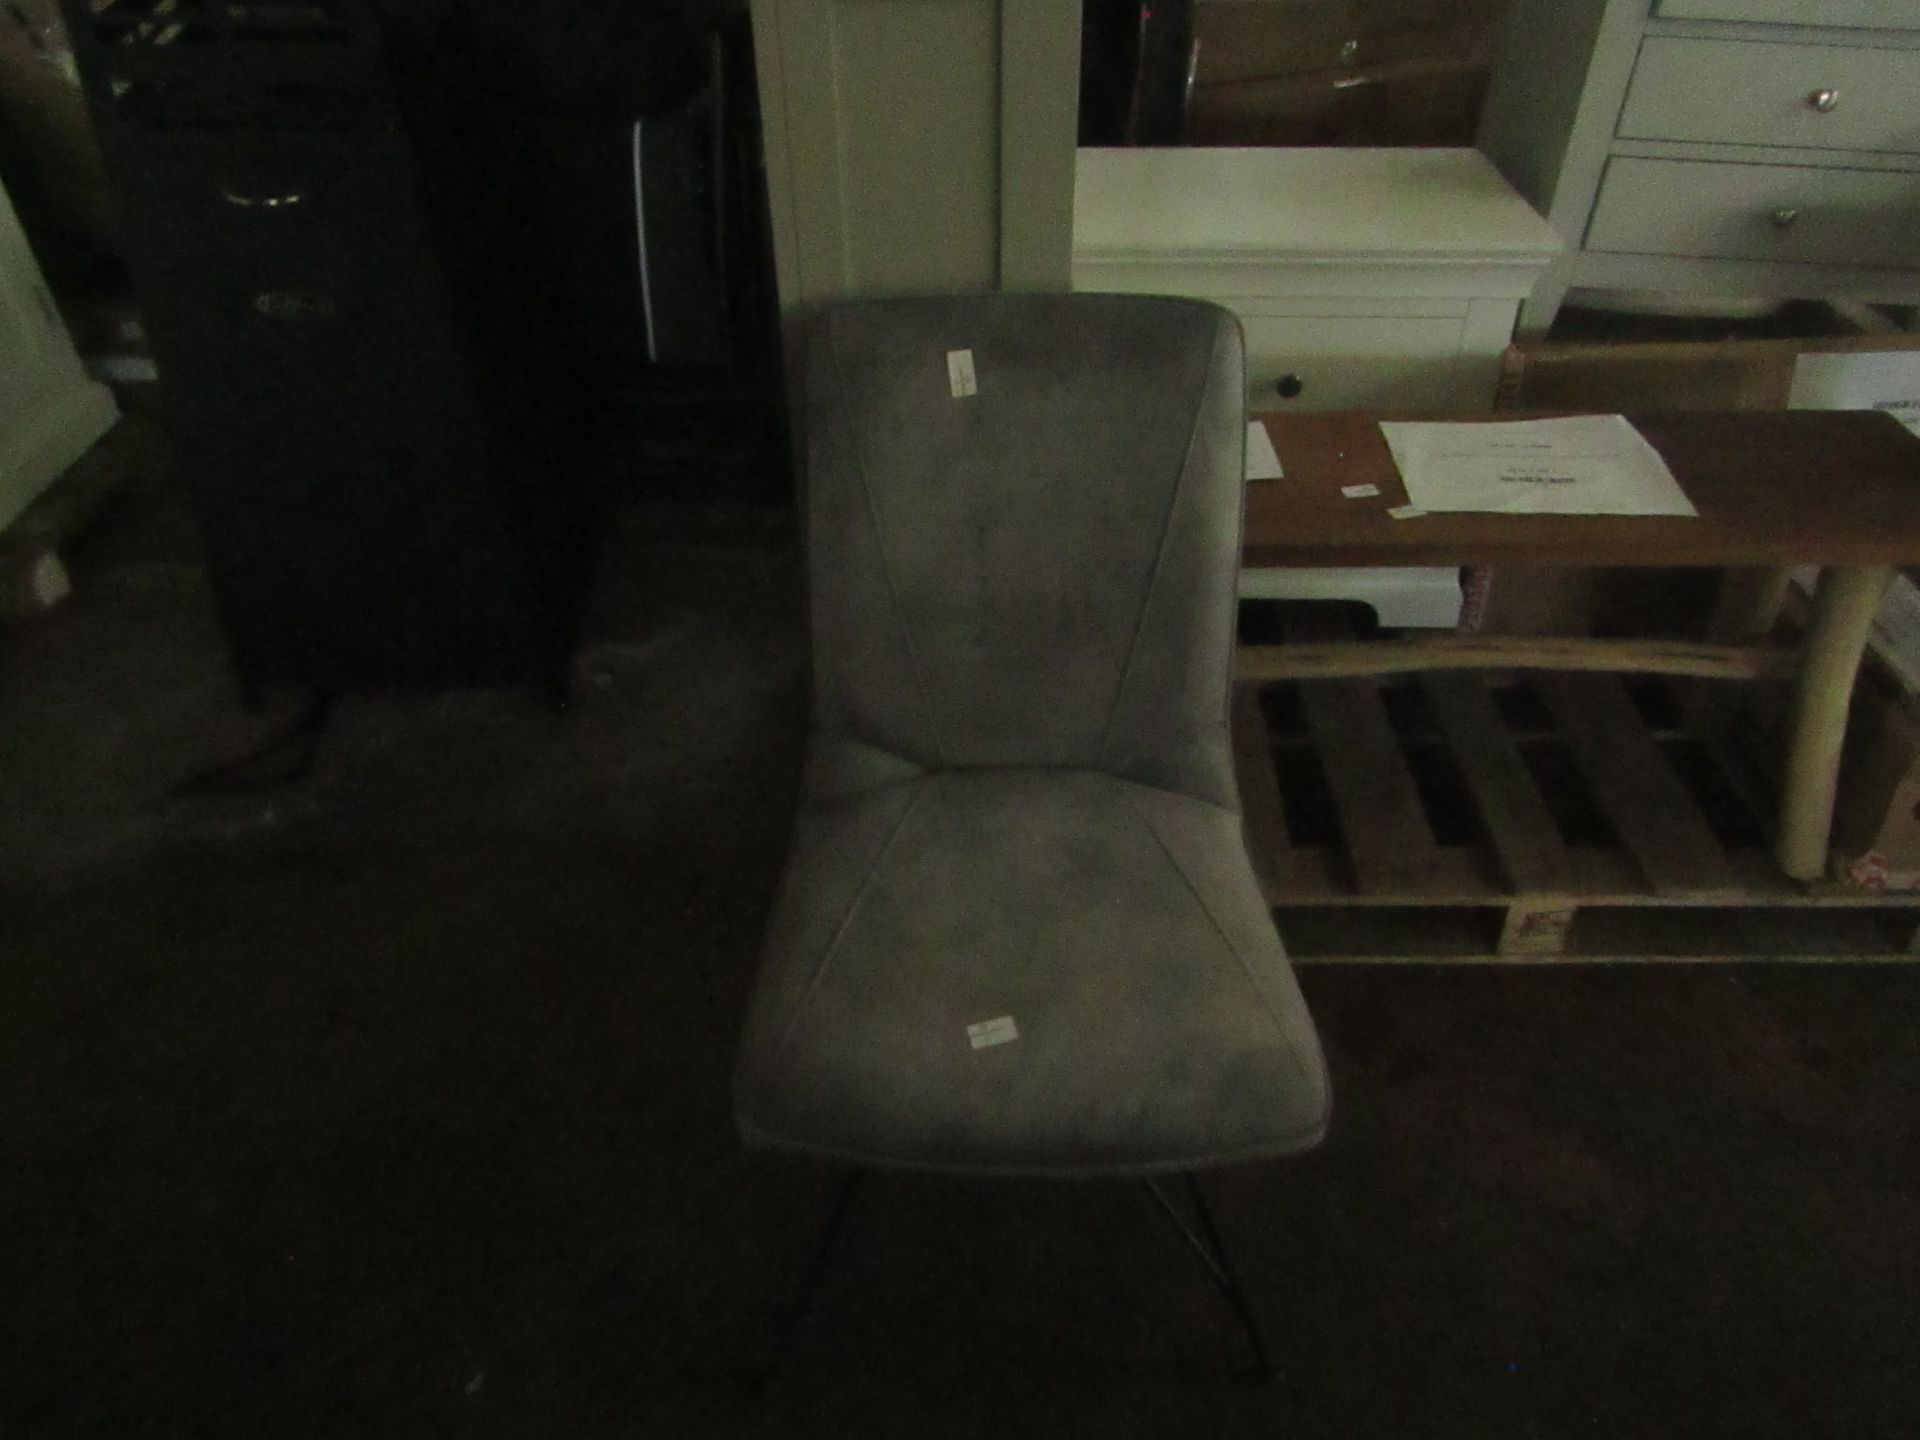 Cox & Cox Provence Swivel Chair RRP Â£175.00 - This item looks to be in good condition and appears